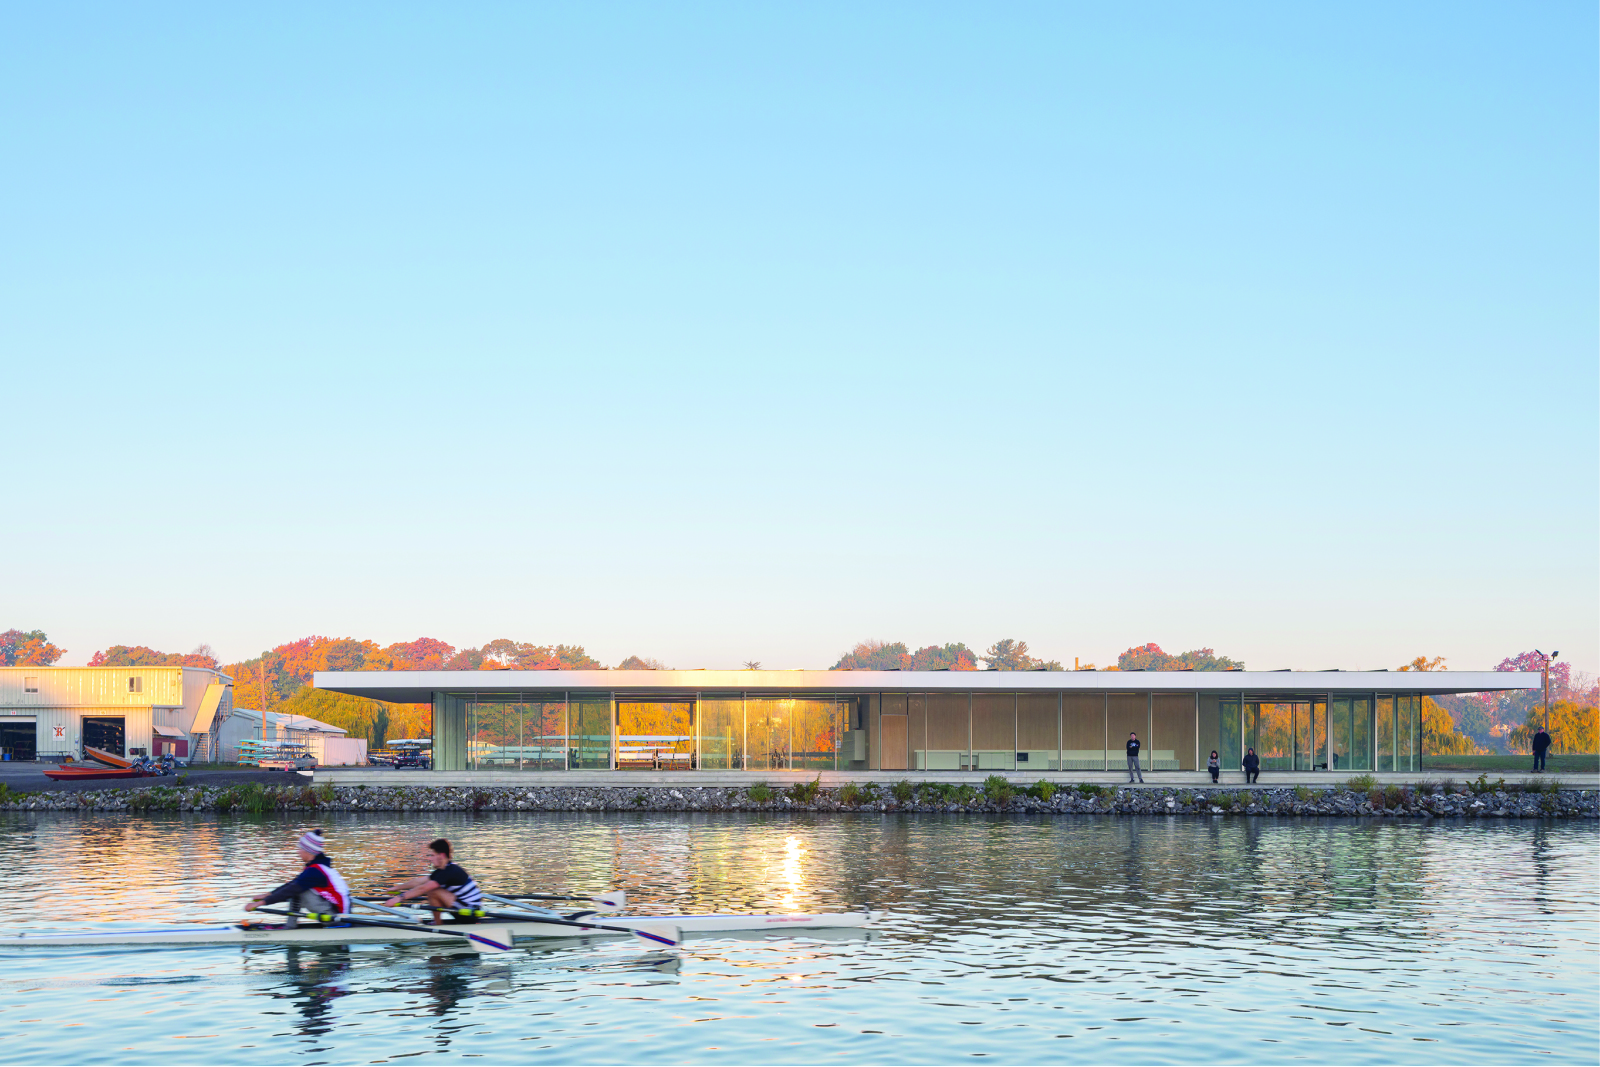 East elevation of the NCRC from the Martindale Pond with rowers on Henley Rowing Course